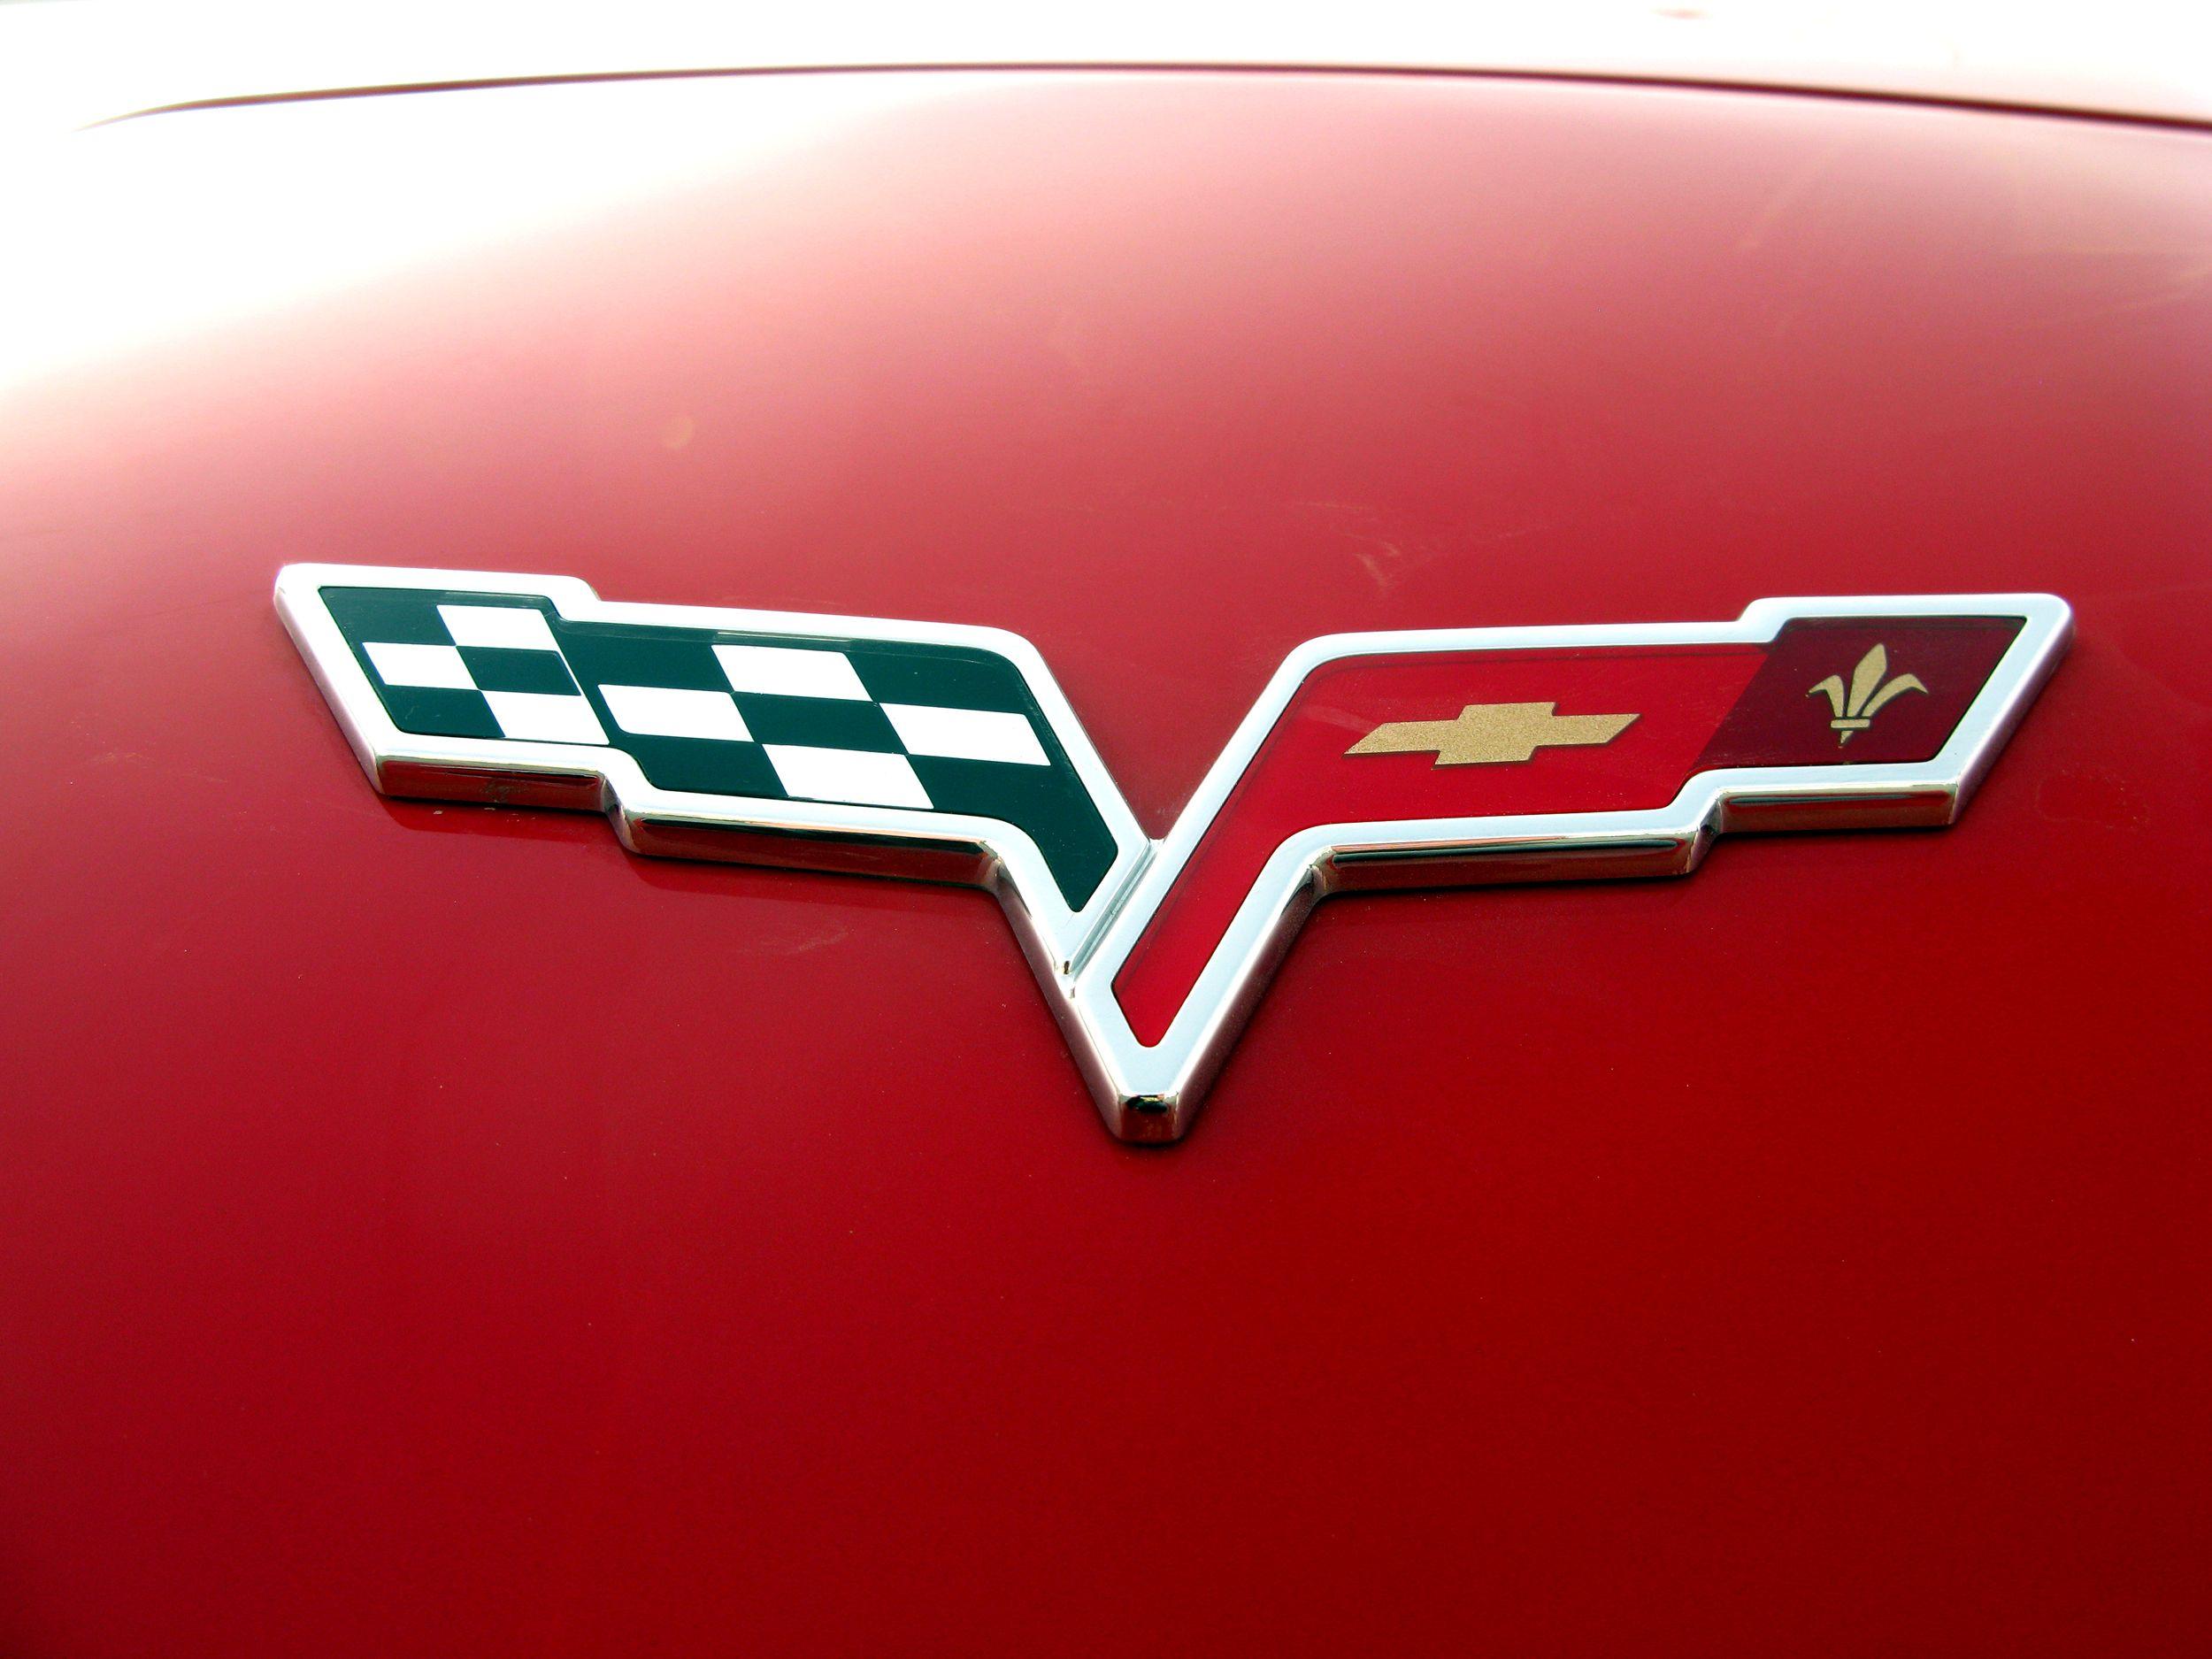 Old Chevrolet Logo - Chevy Logo, Chevrolet Car Symbol Meaning and History | Car Brand ...